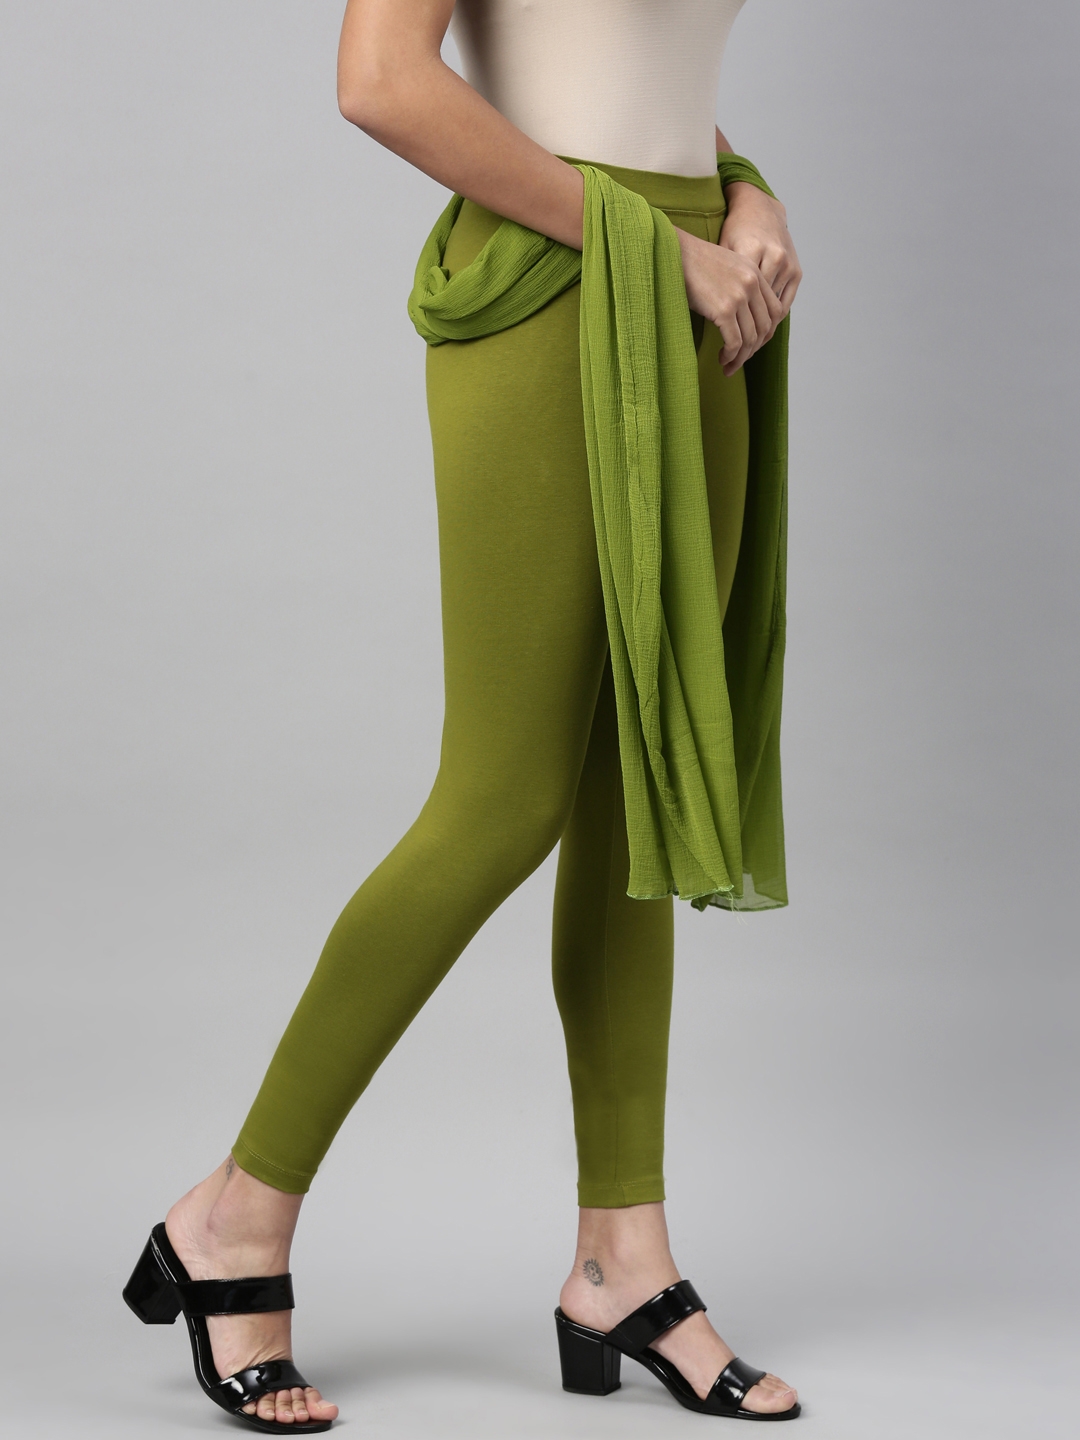 Comfort Leggings Vol 2 Combo Wholesale In Shop, this catalog fabric is  Cotton Lycra,